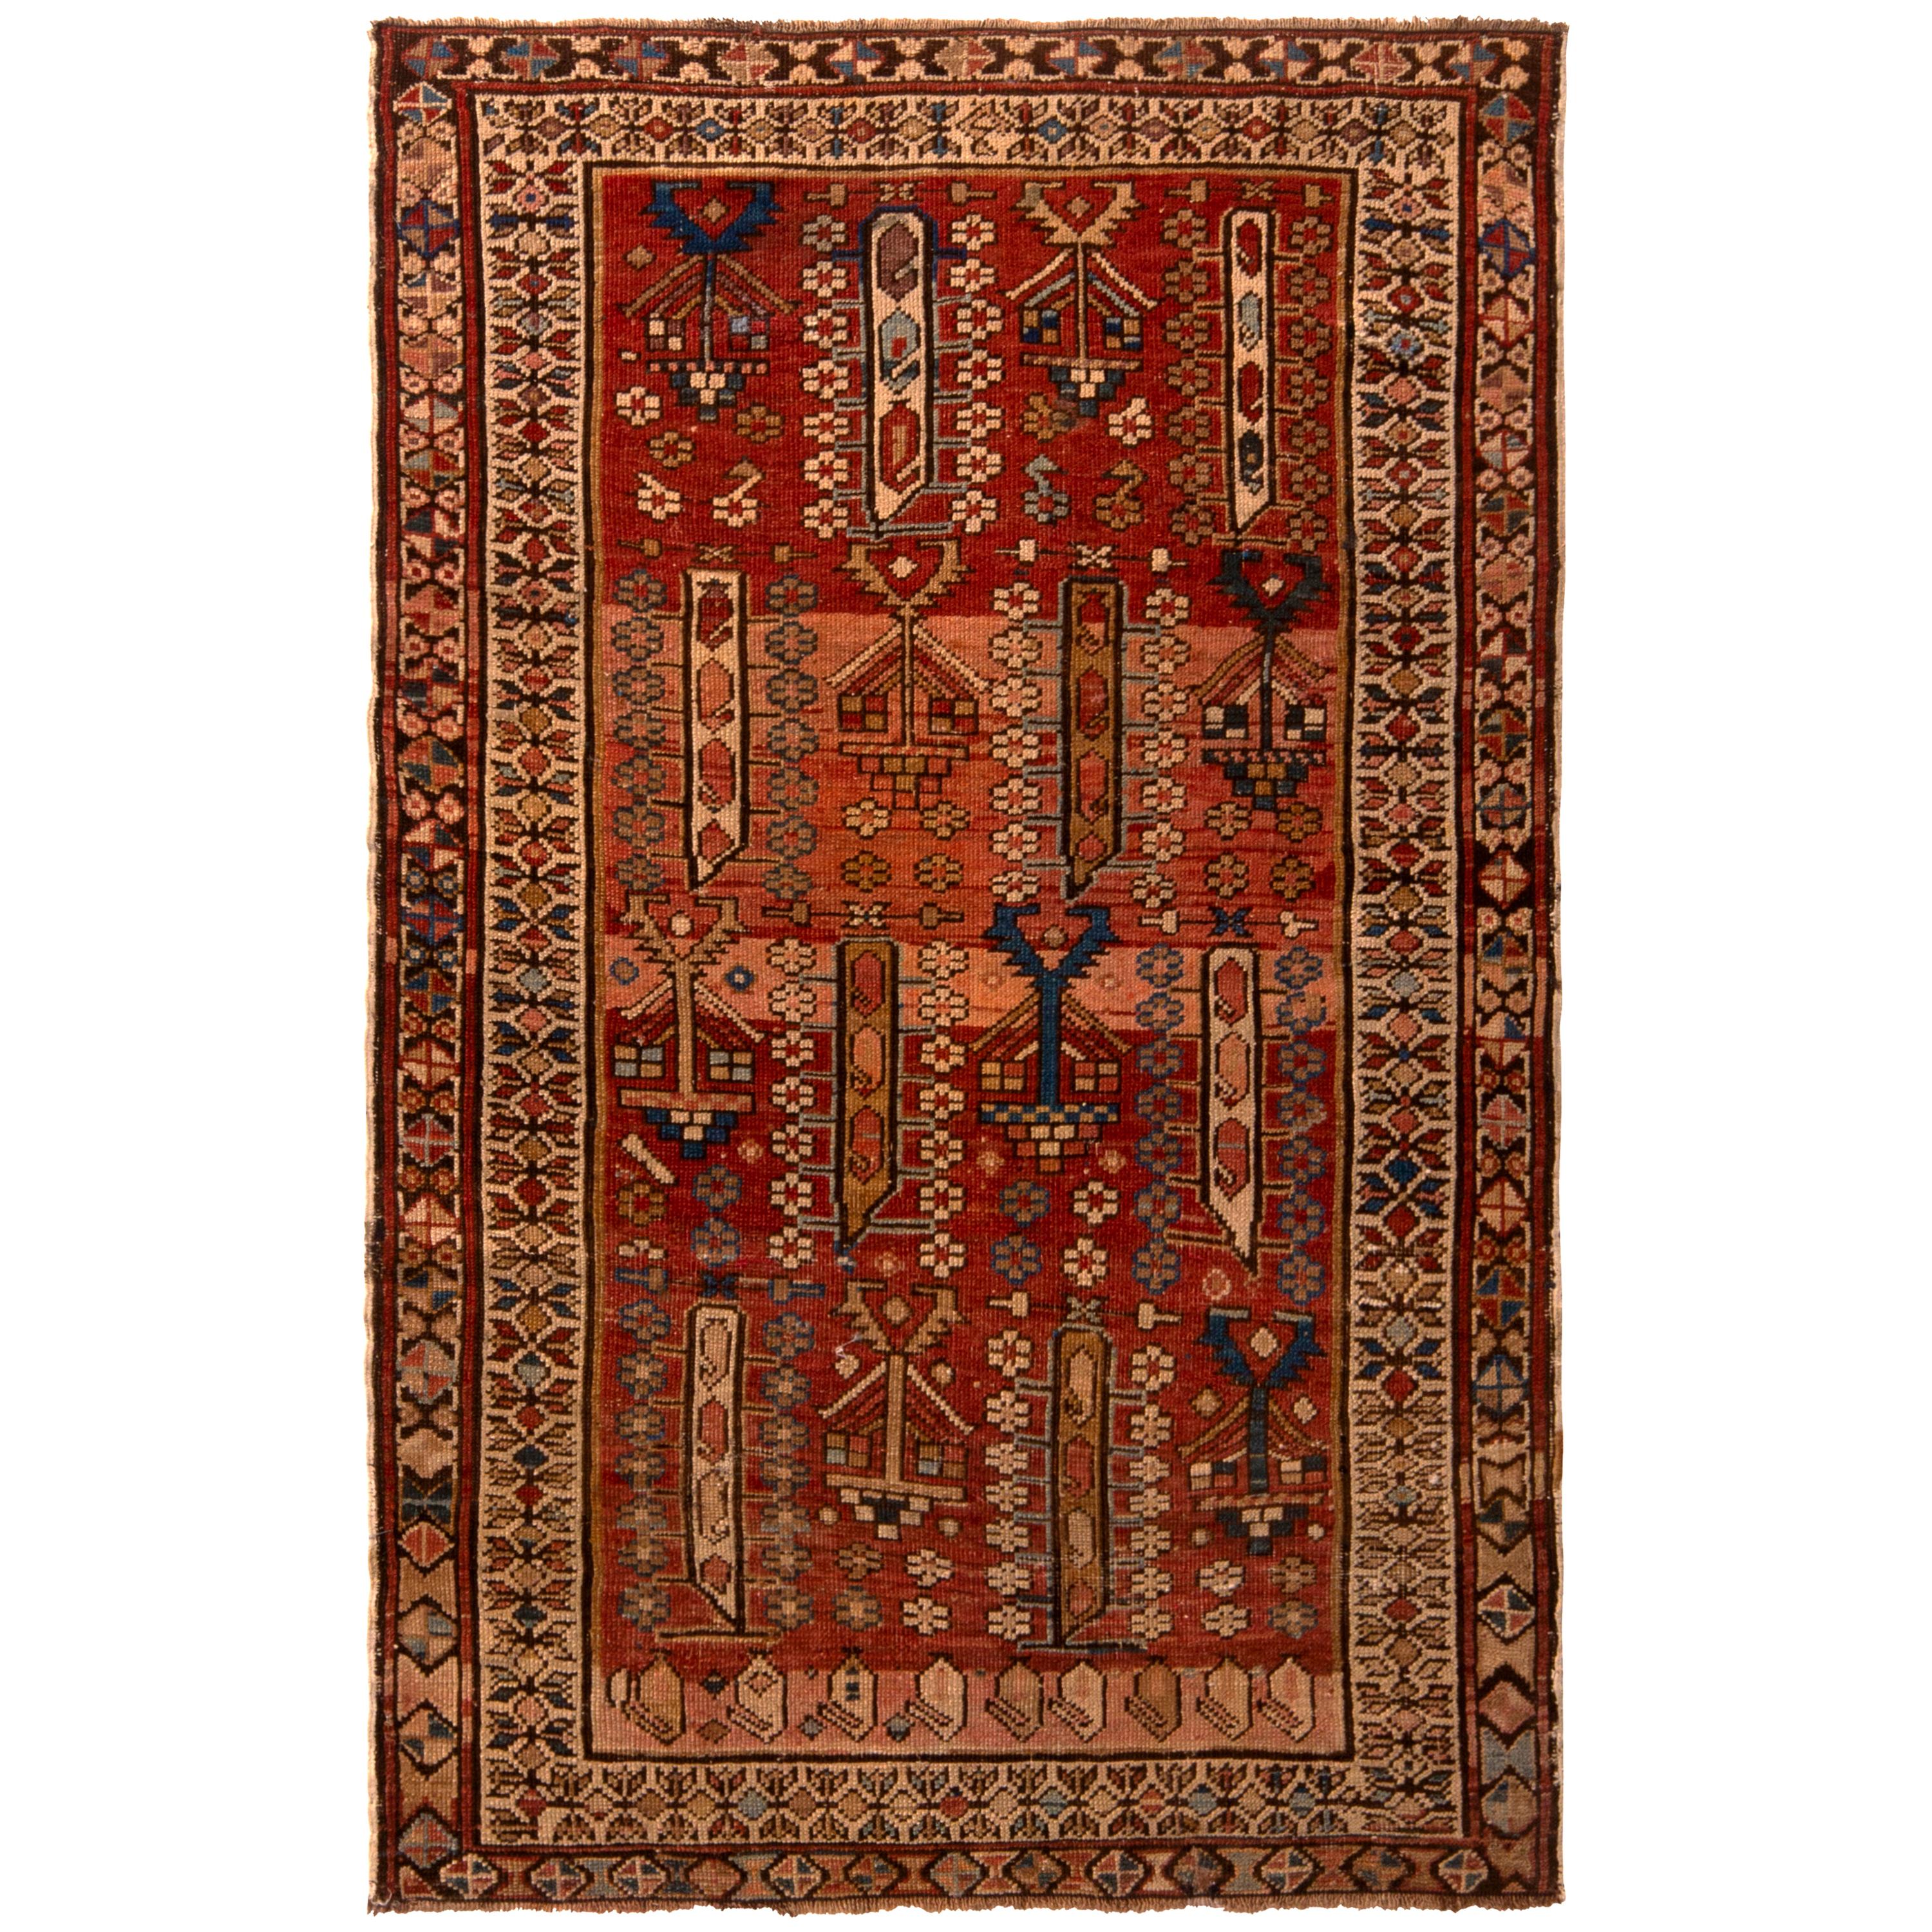 Antique Kuba Rug Beige Red Boteh Tribal Patterns with Pink Accent by Rug & Kilim